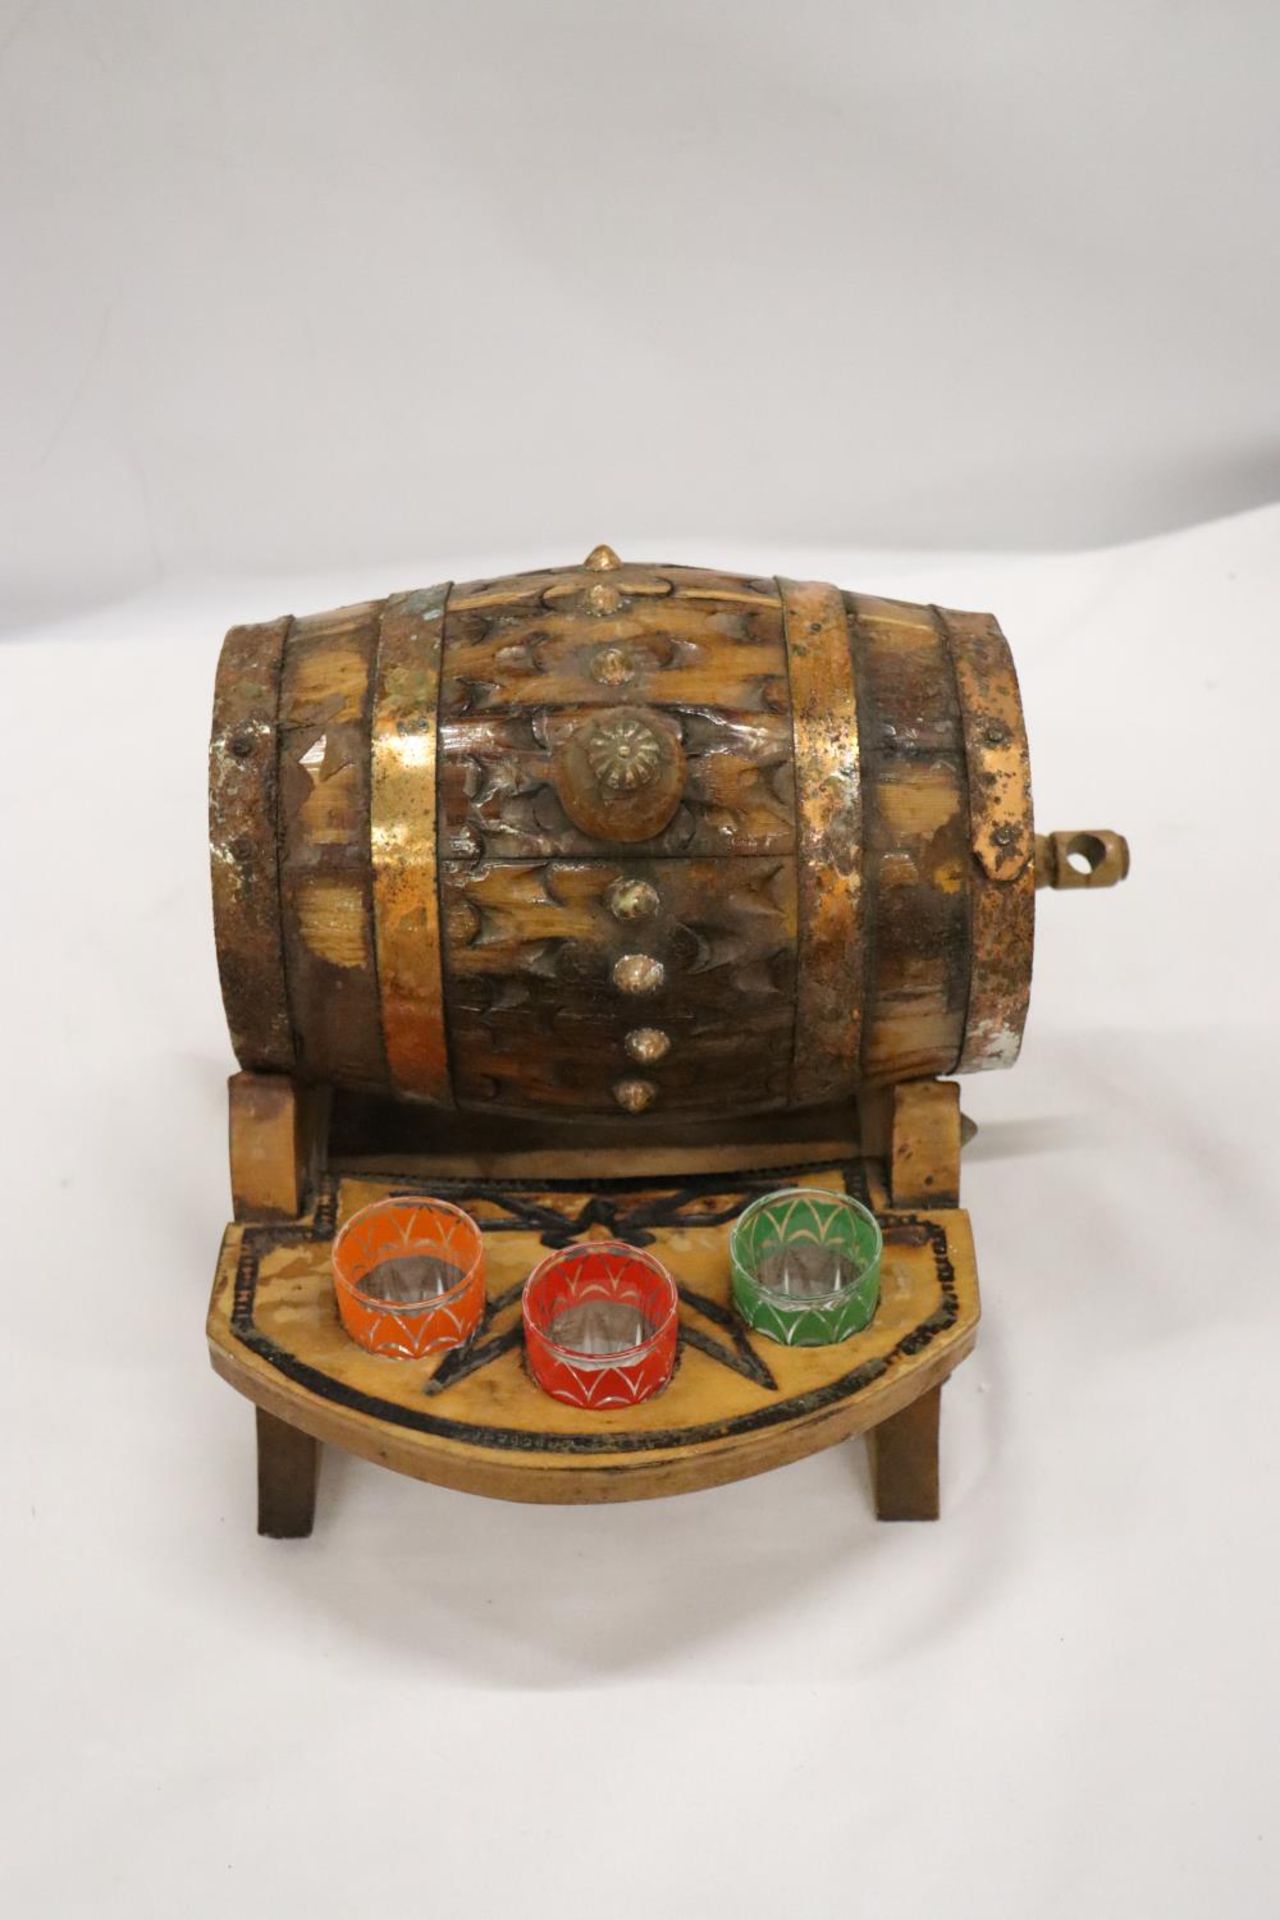 A SMALL VINTAGE BARREL WITH SIX GLASSES - 1 A/F - Image 3 of 5